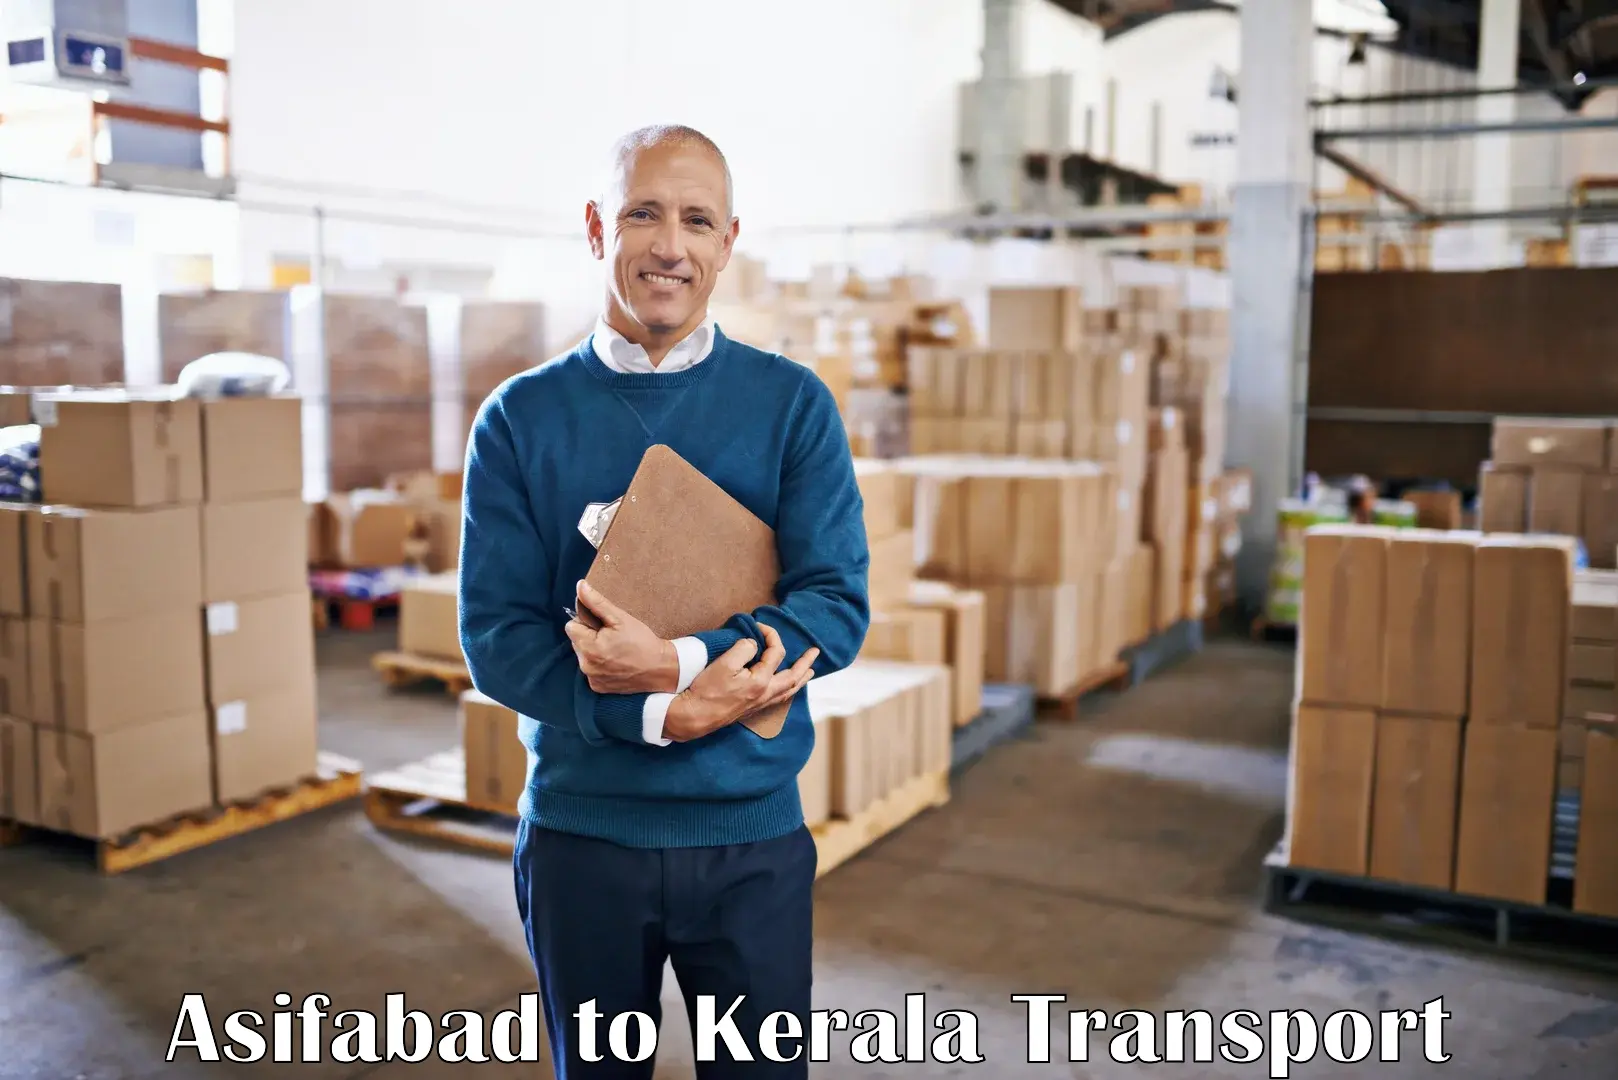 Truck transport companies in India Asifabad to Kakkayam